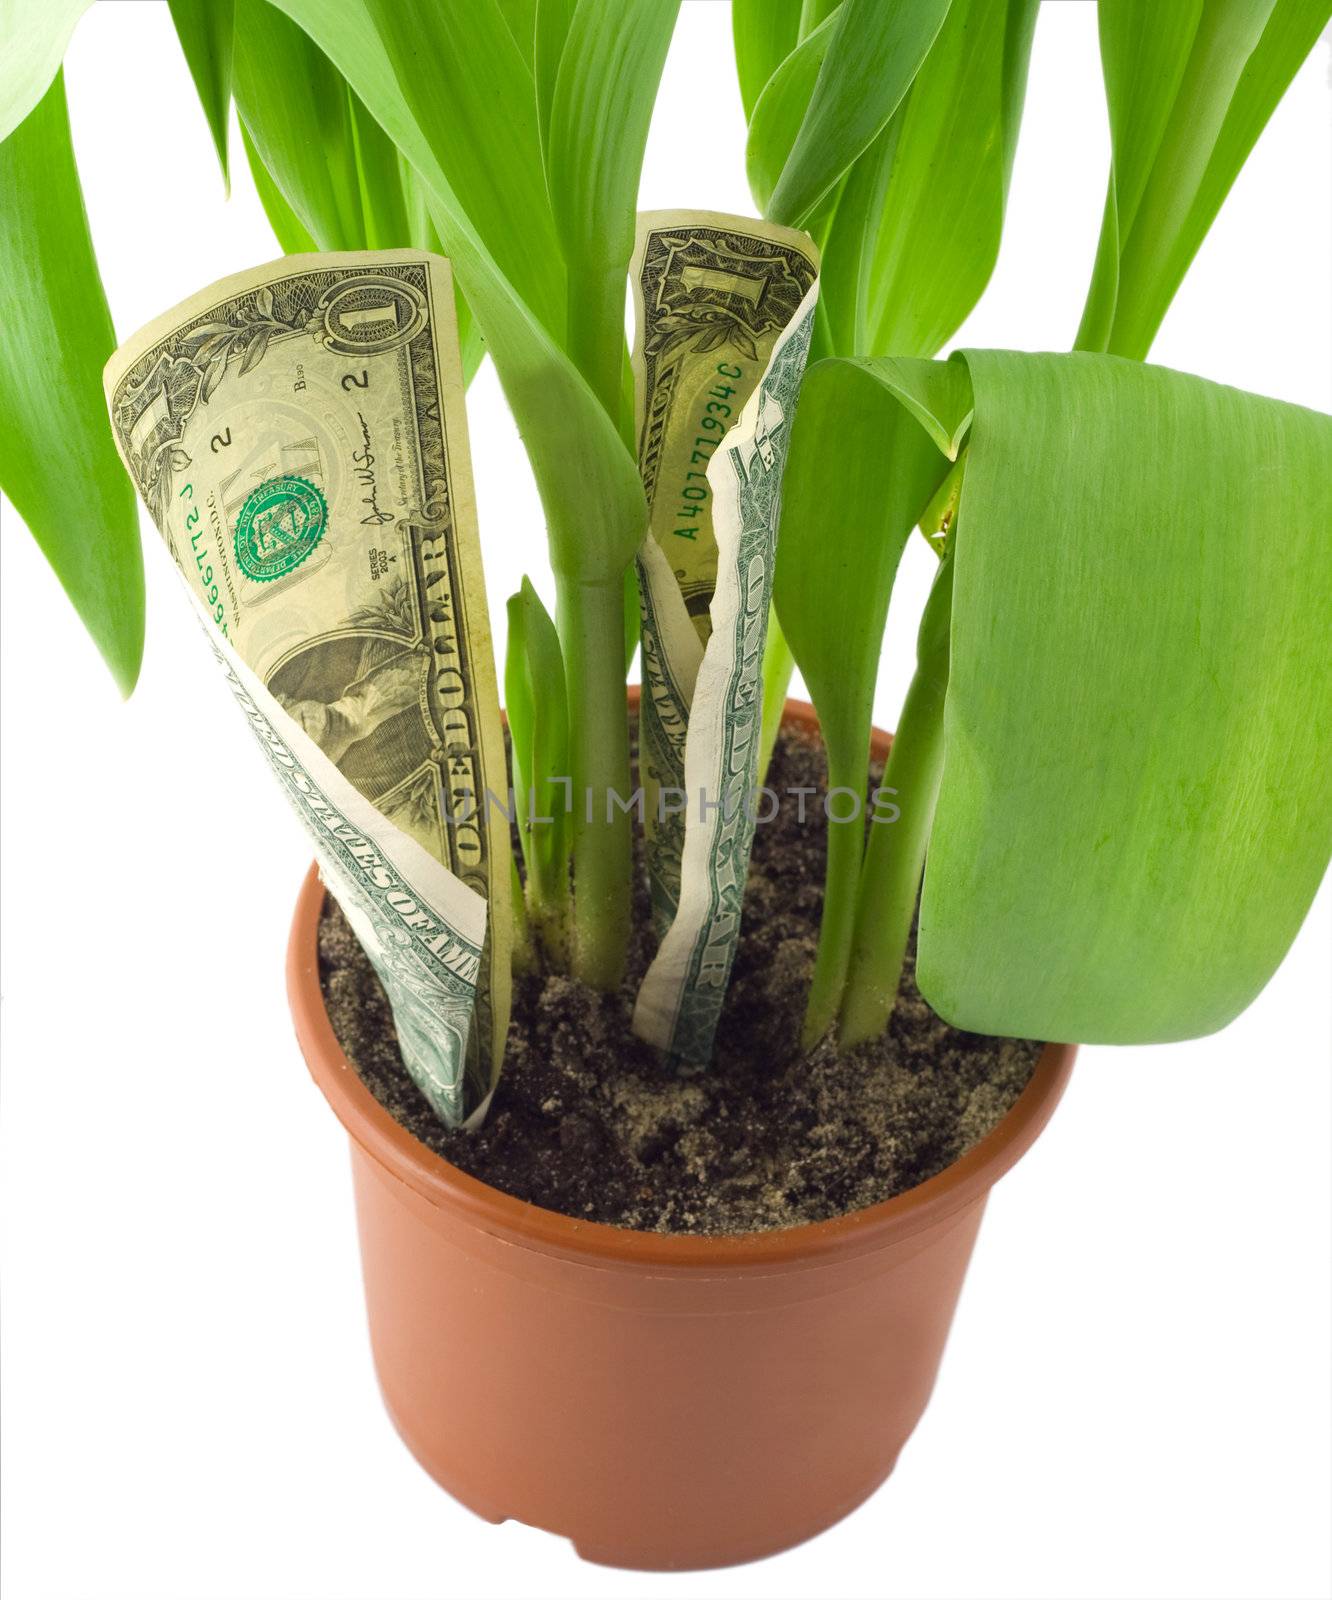 Money banknotes growing in flowerpot isolated on white background.